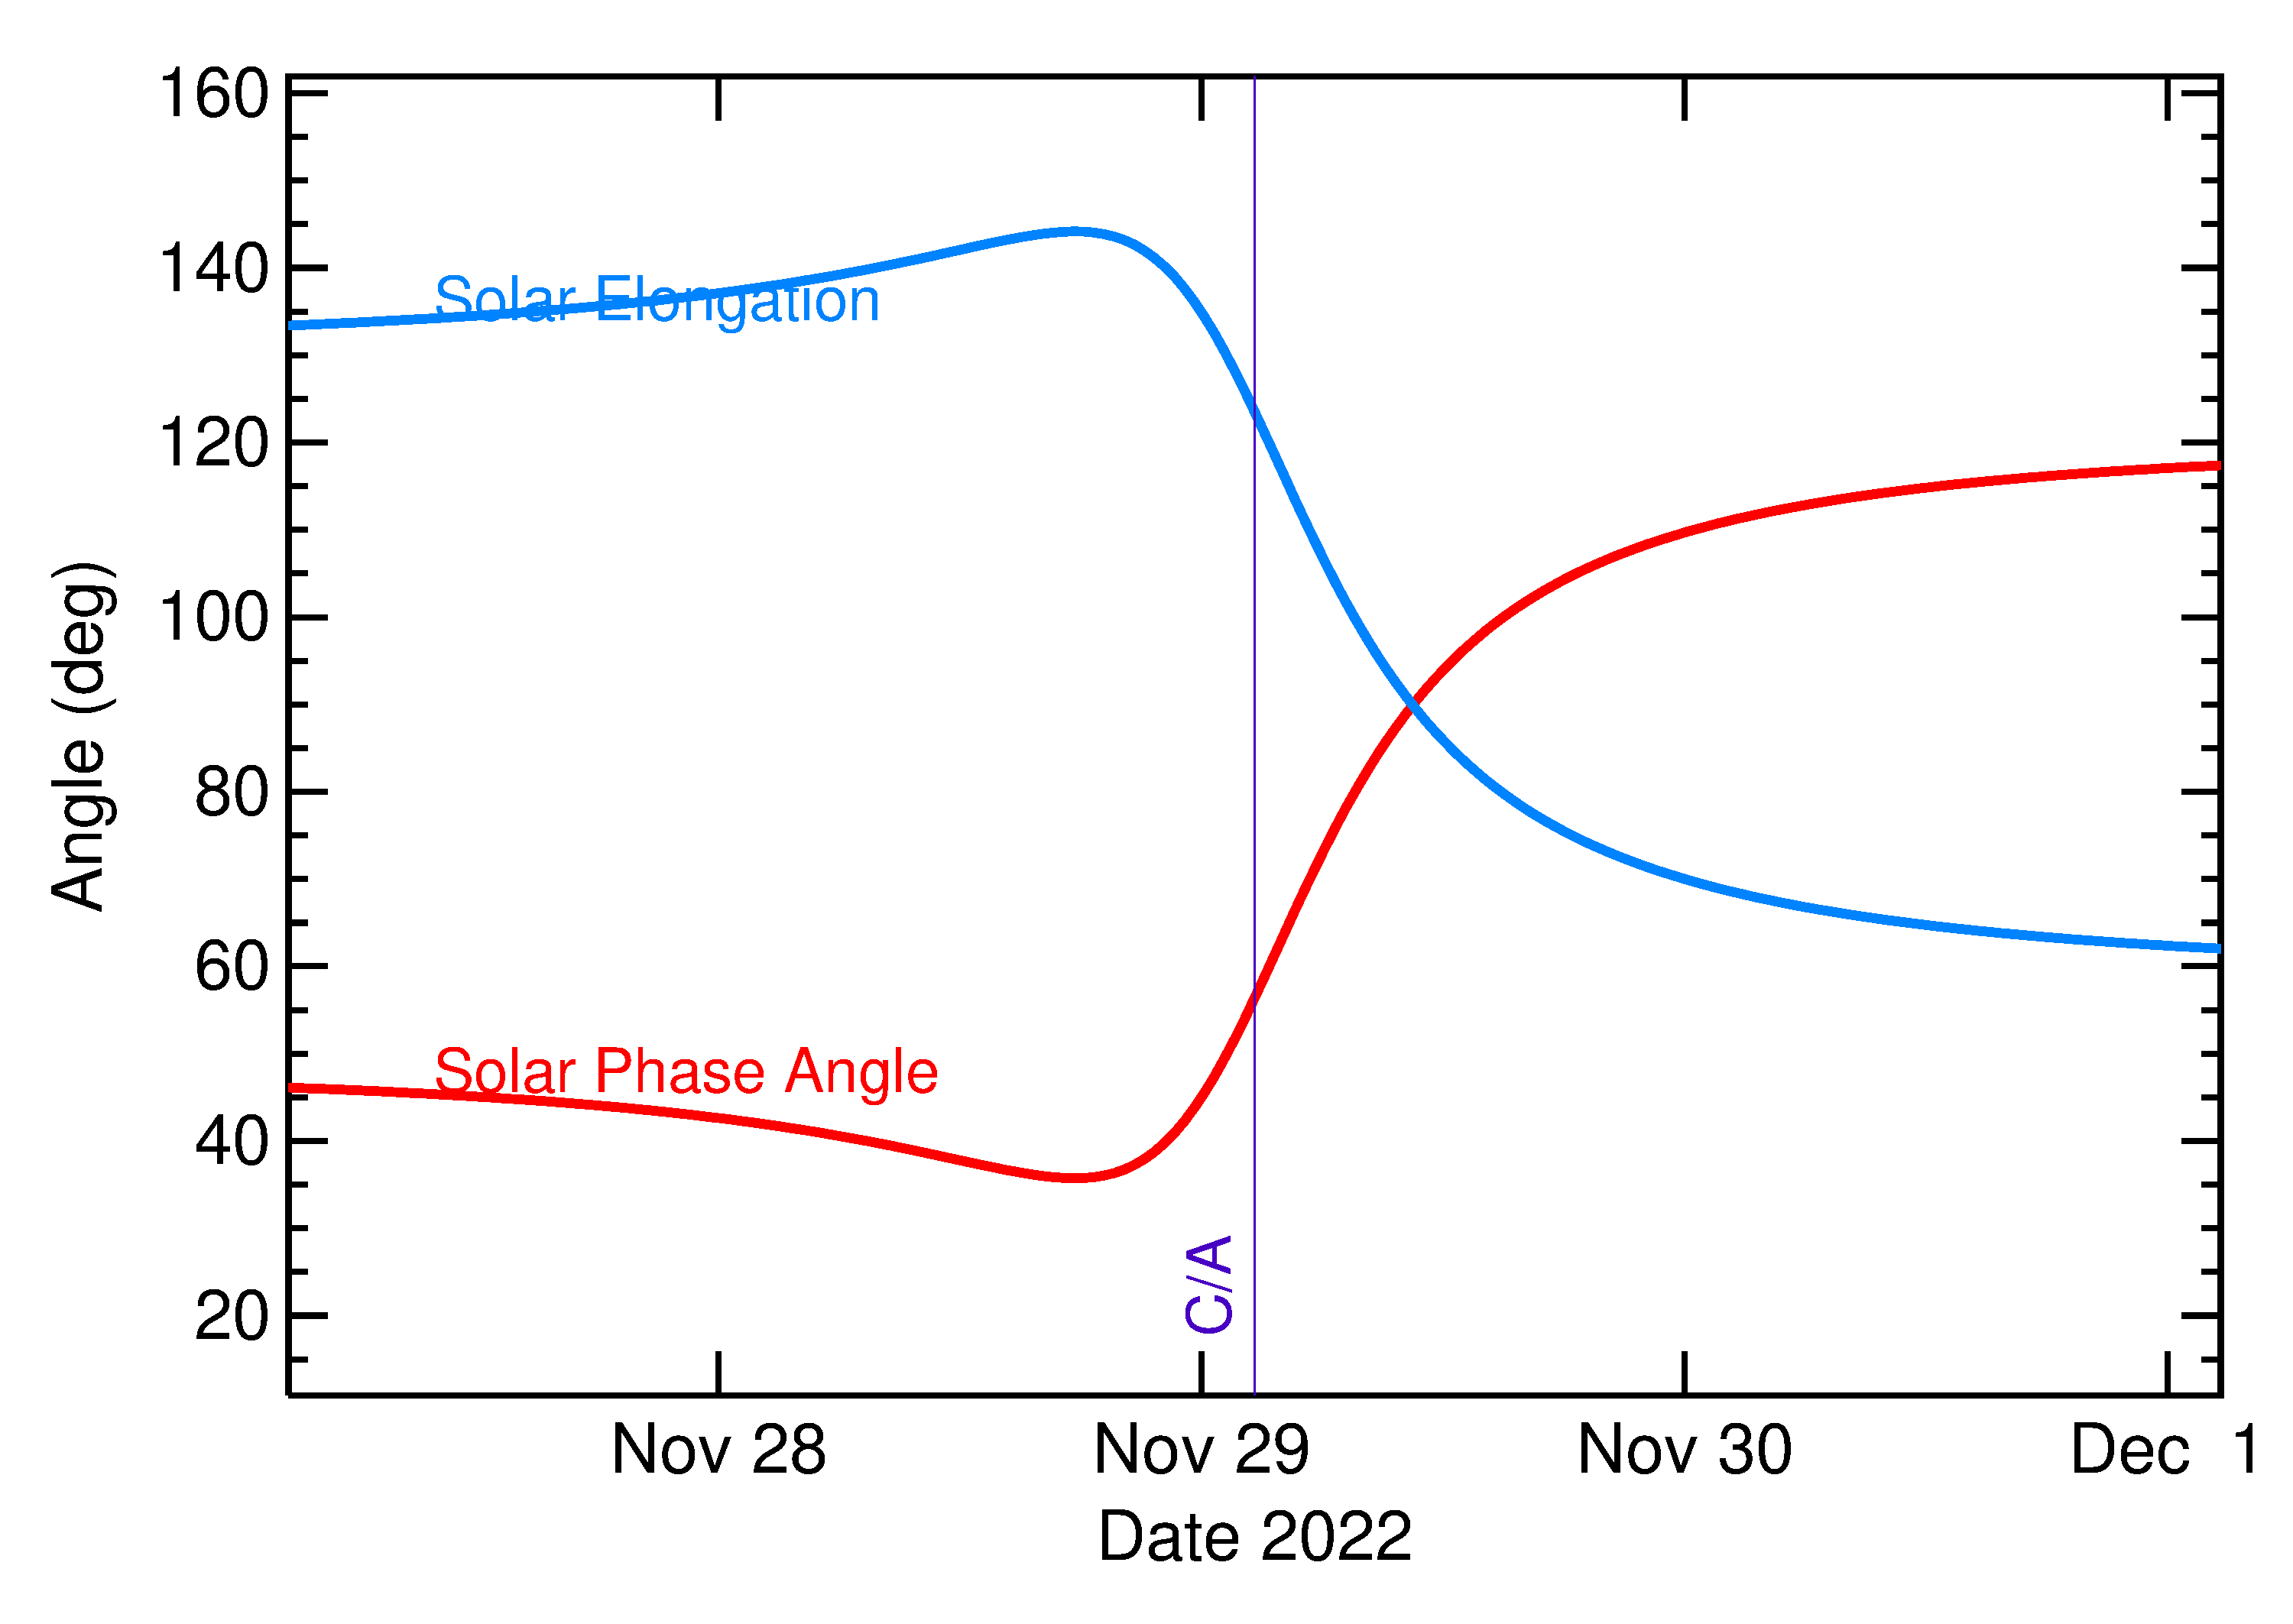 Solar Elongation and Solar Phase Angle of 2022 WE11 in the days around closest approach